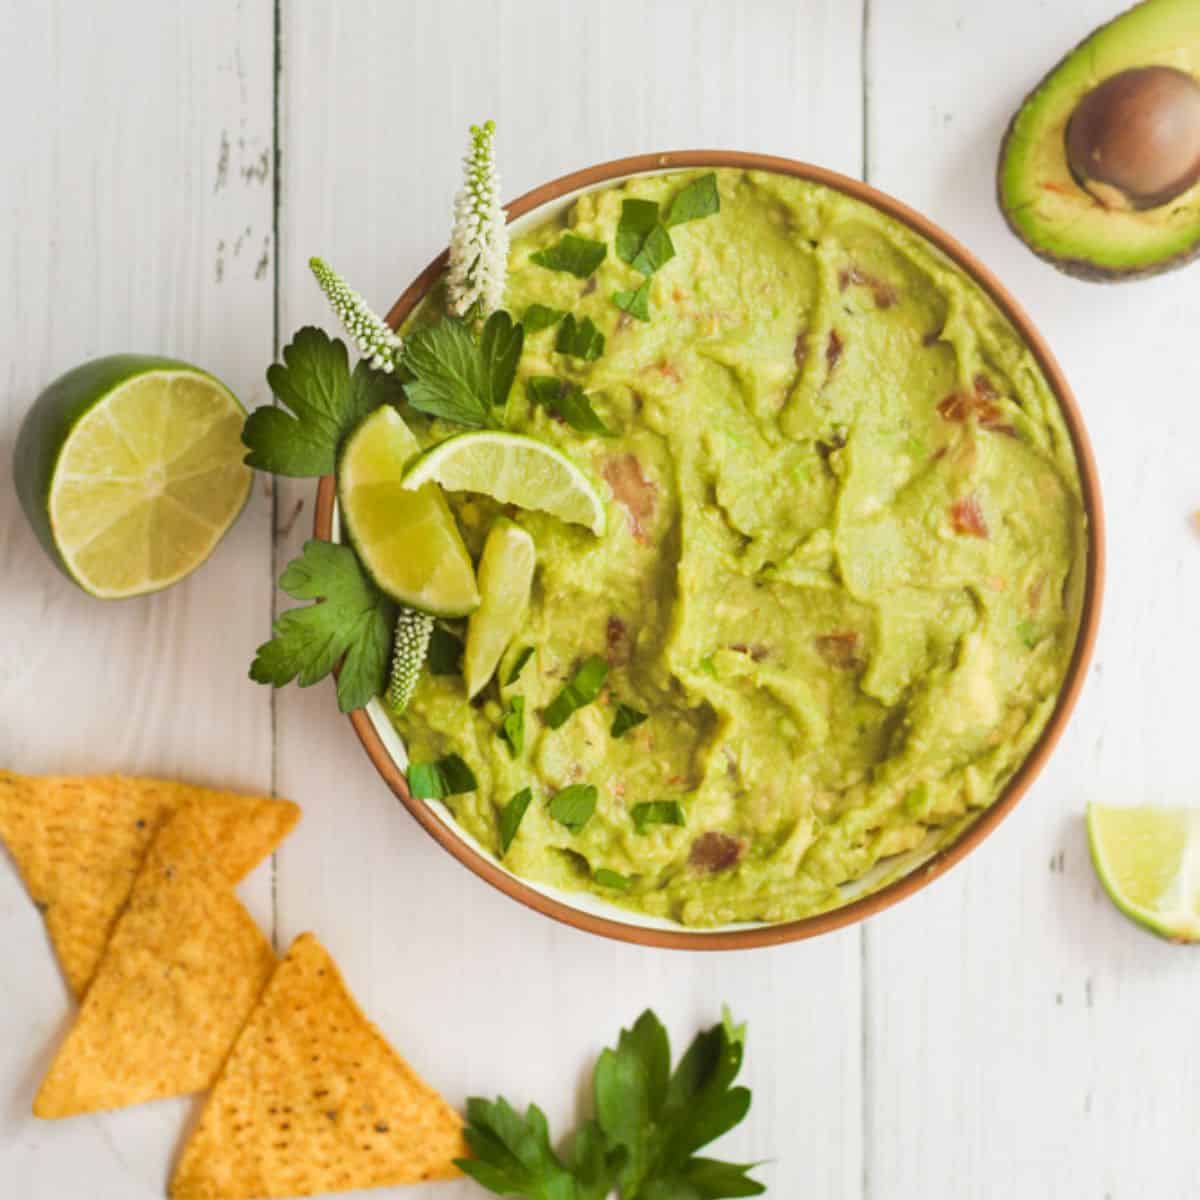 guacamole recipe with no onion in a white bowl with chips, limes, and a half an avocado surrounding it.